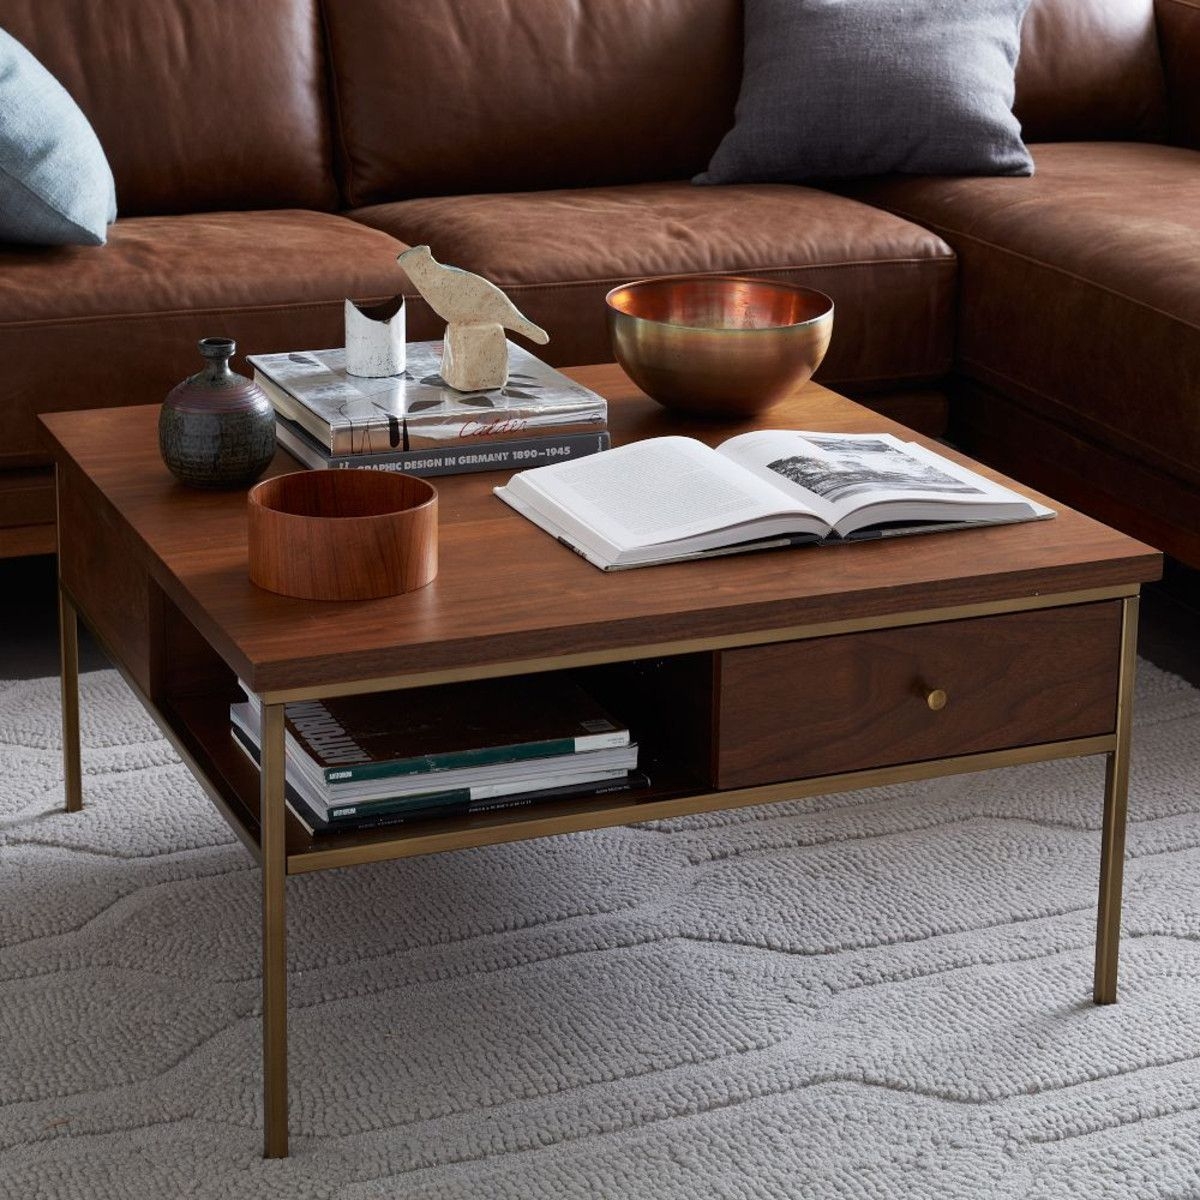 Nook coffee table